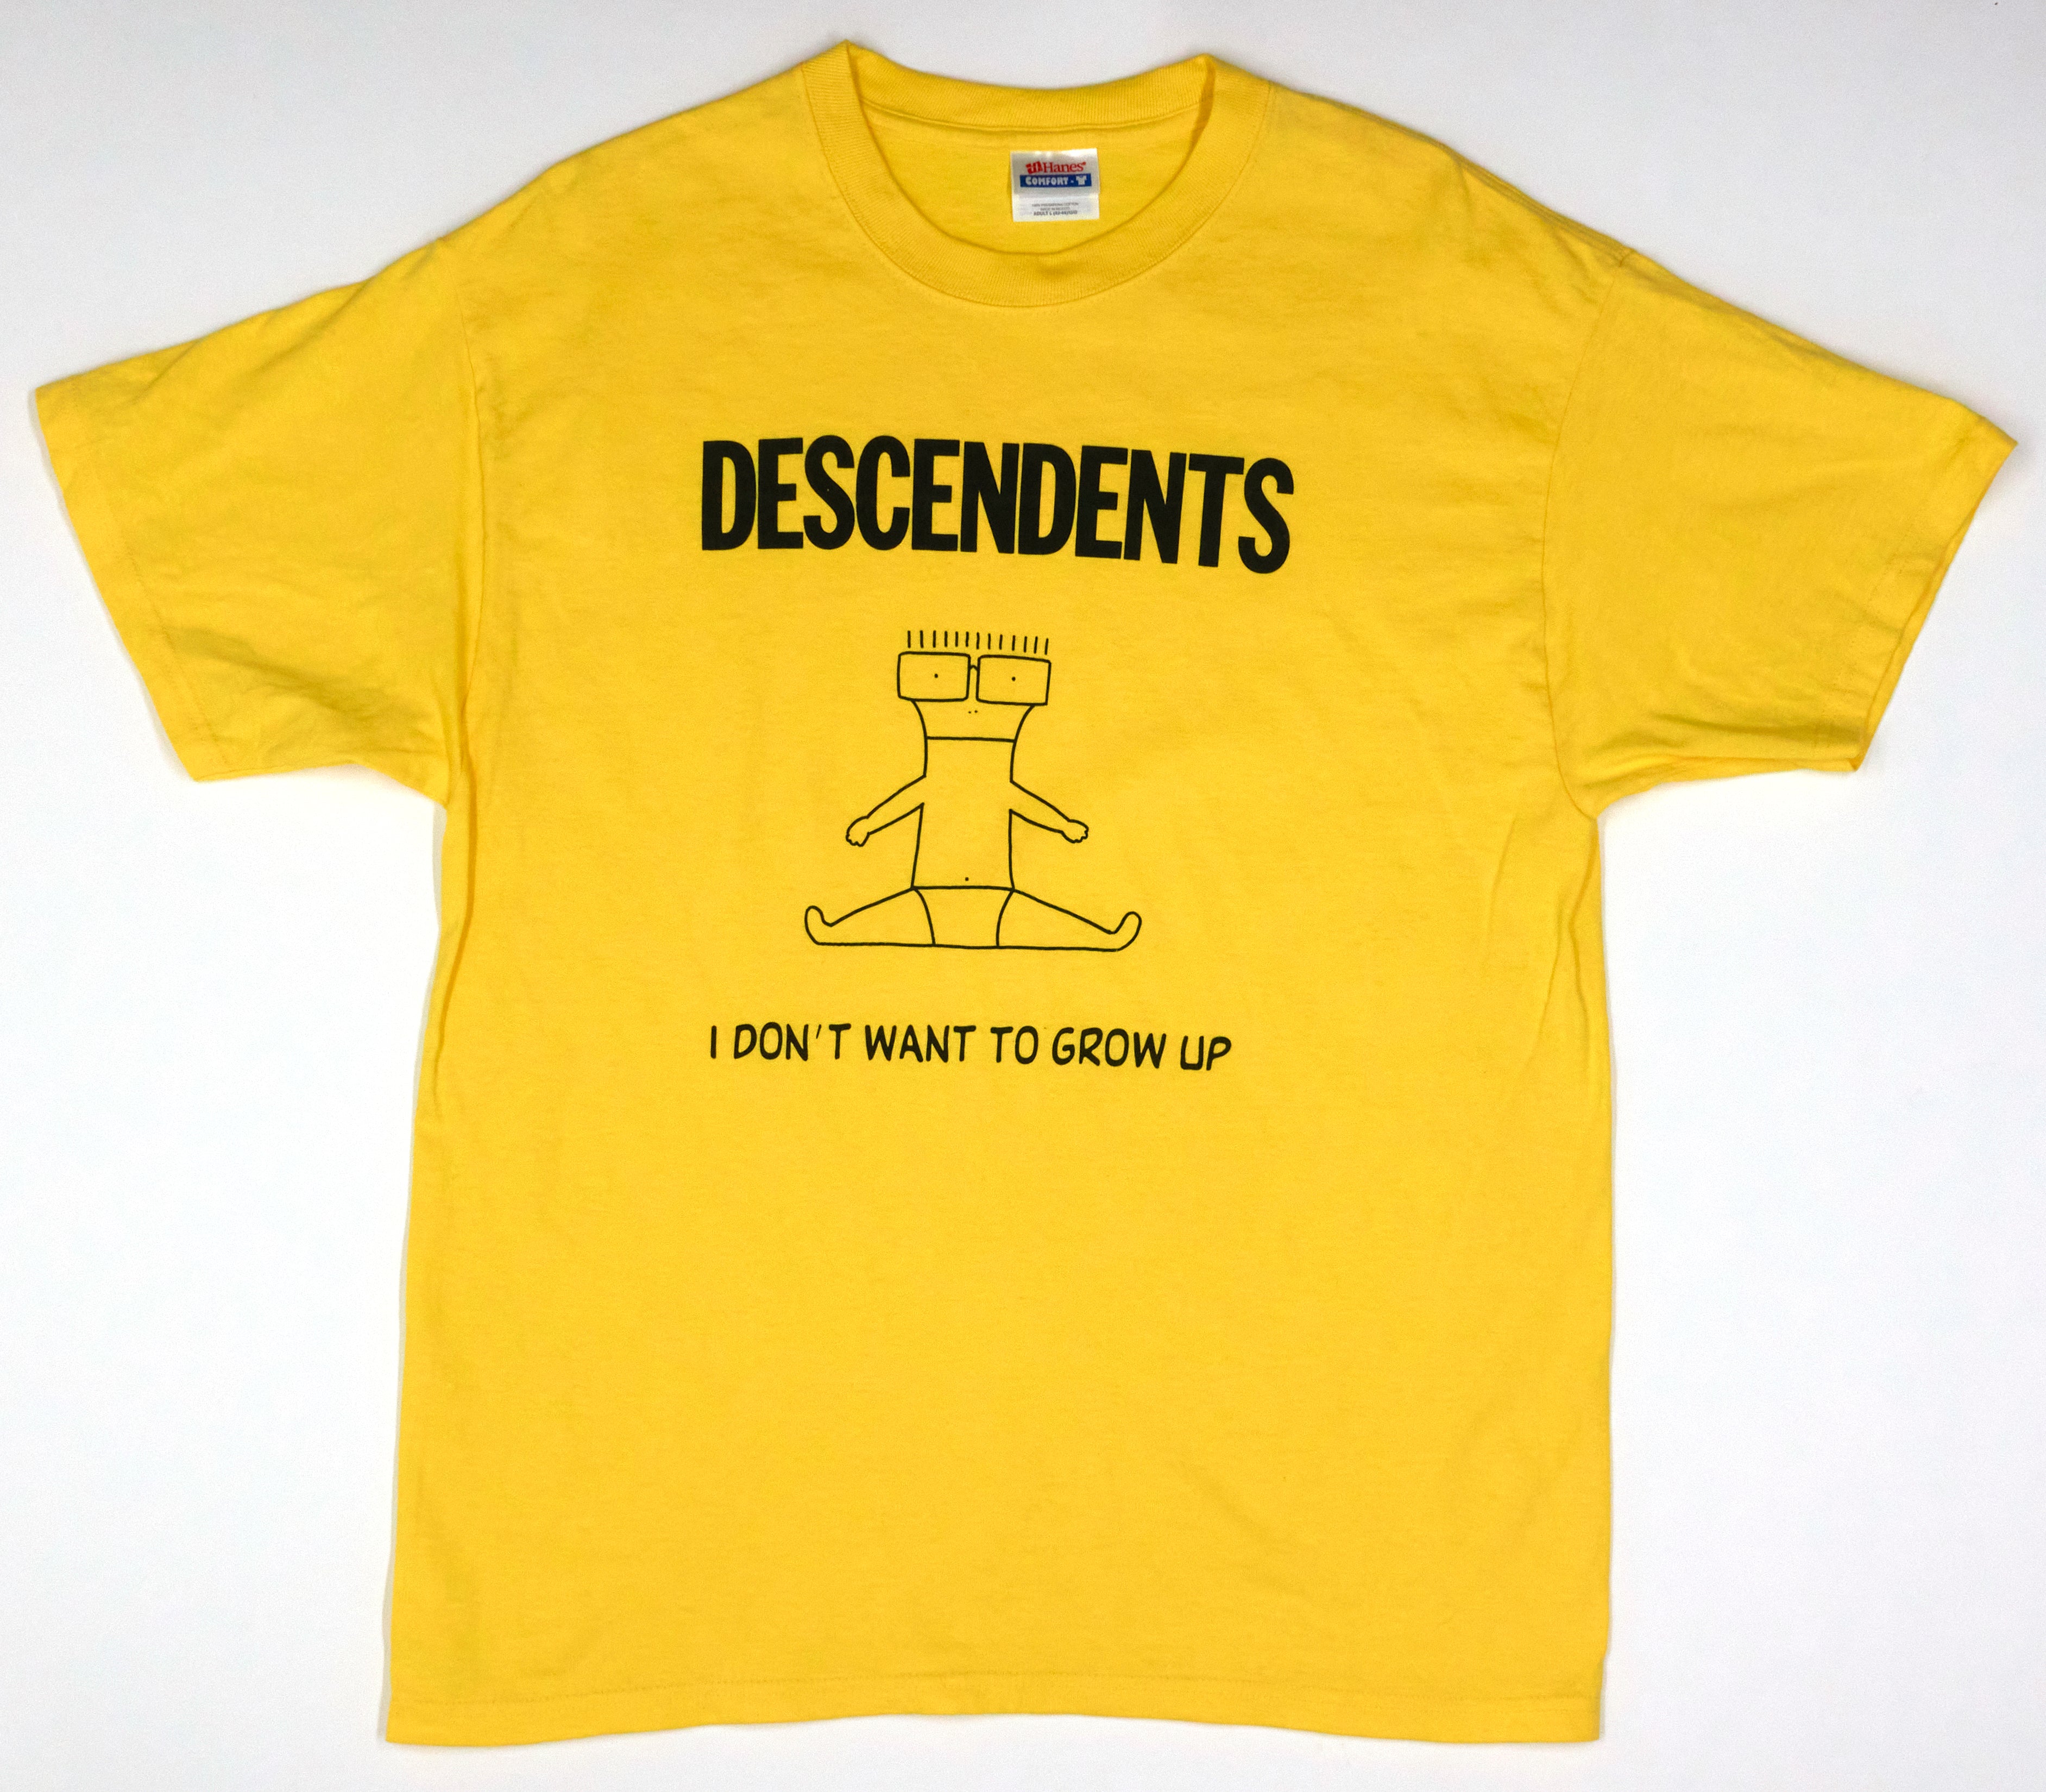 Descendents - I Don't Want To Grow Up Yellow Tour Shirt Size Large